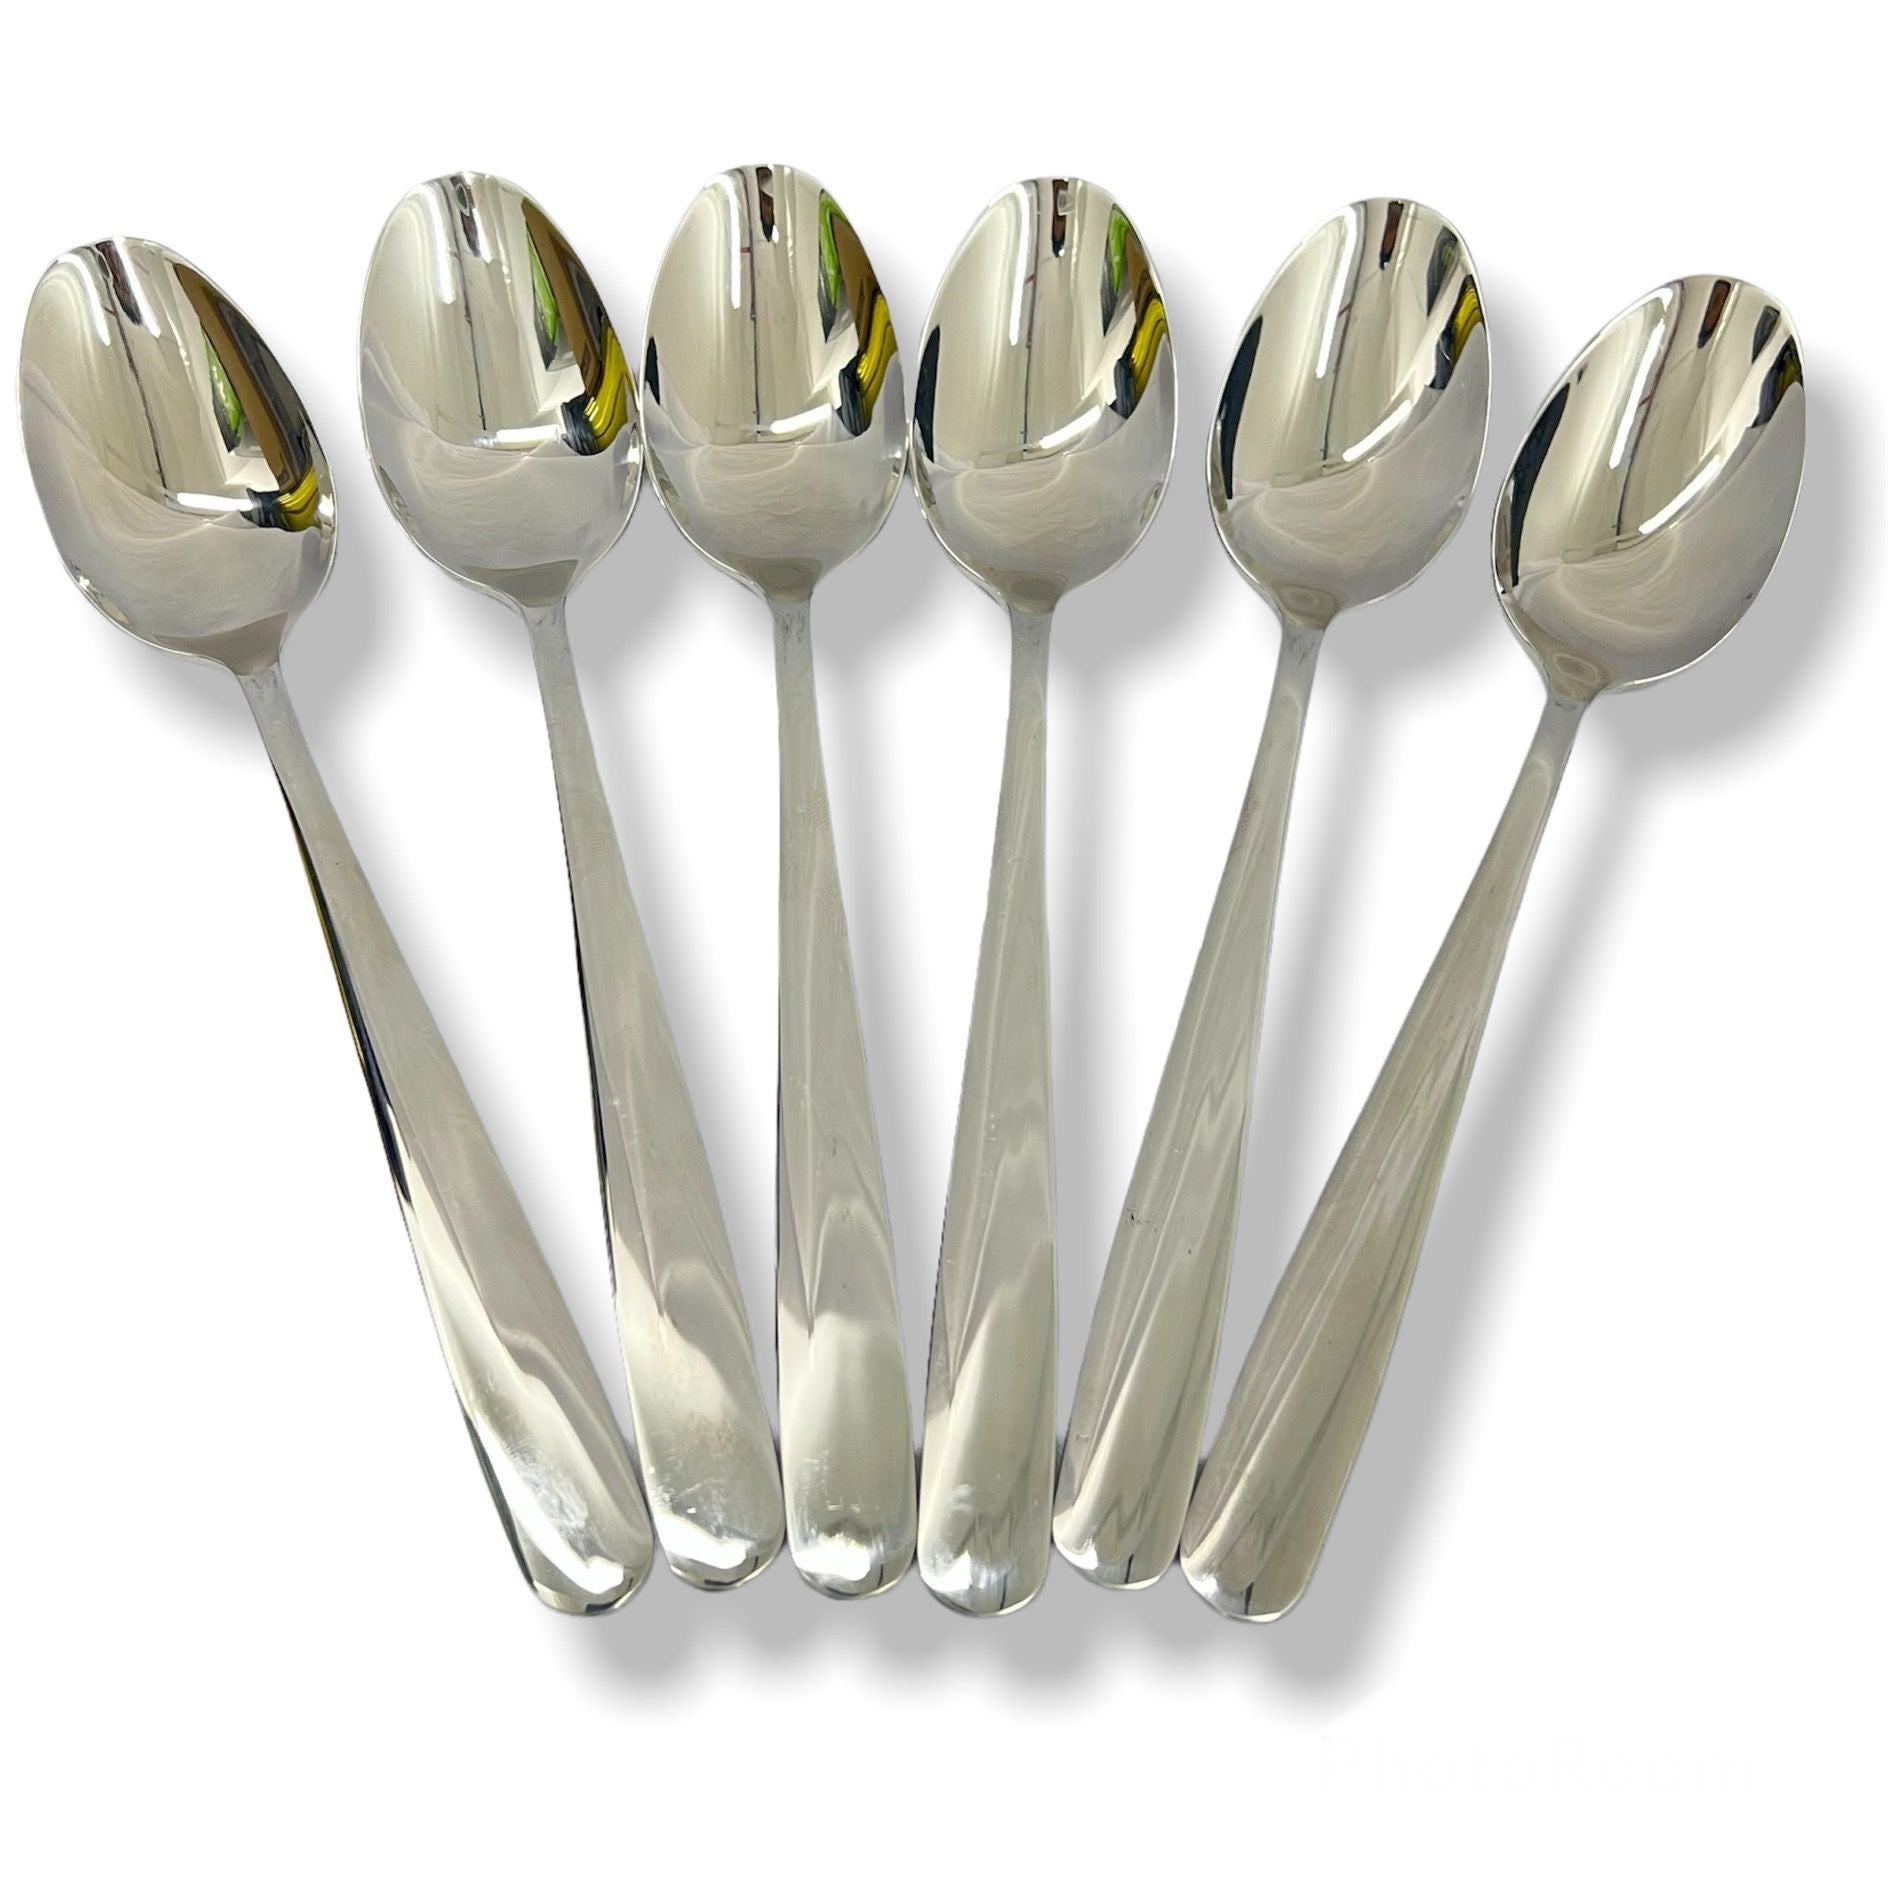 YICAN High Grade Stainless Steel Spoon 6pcs